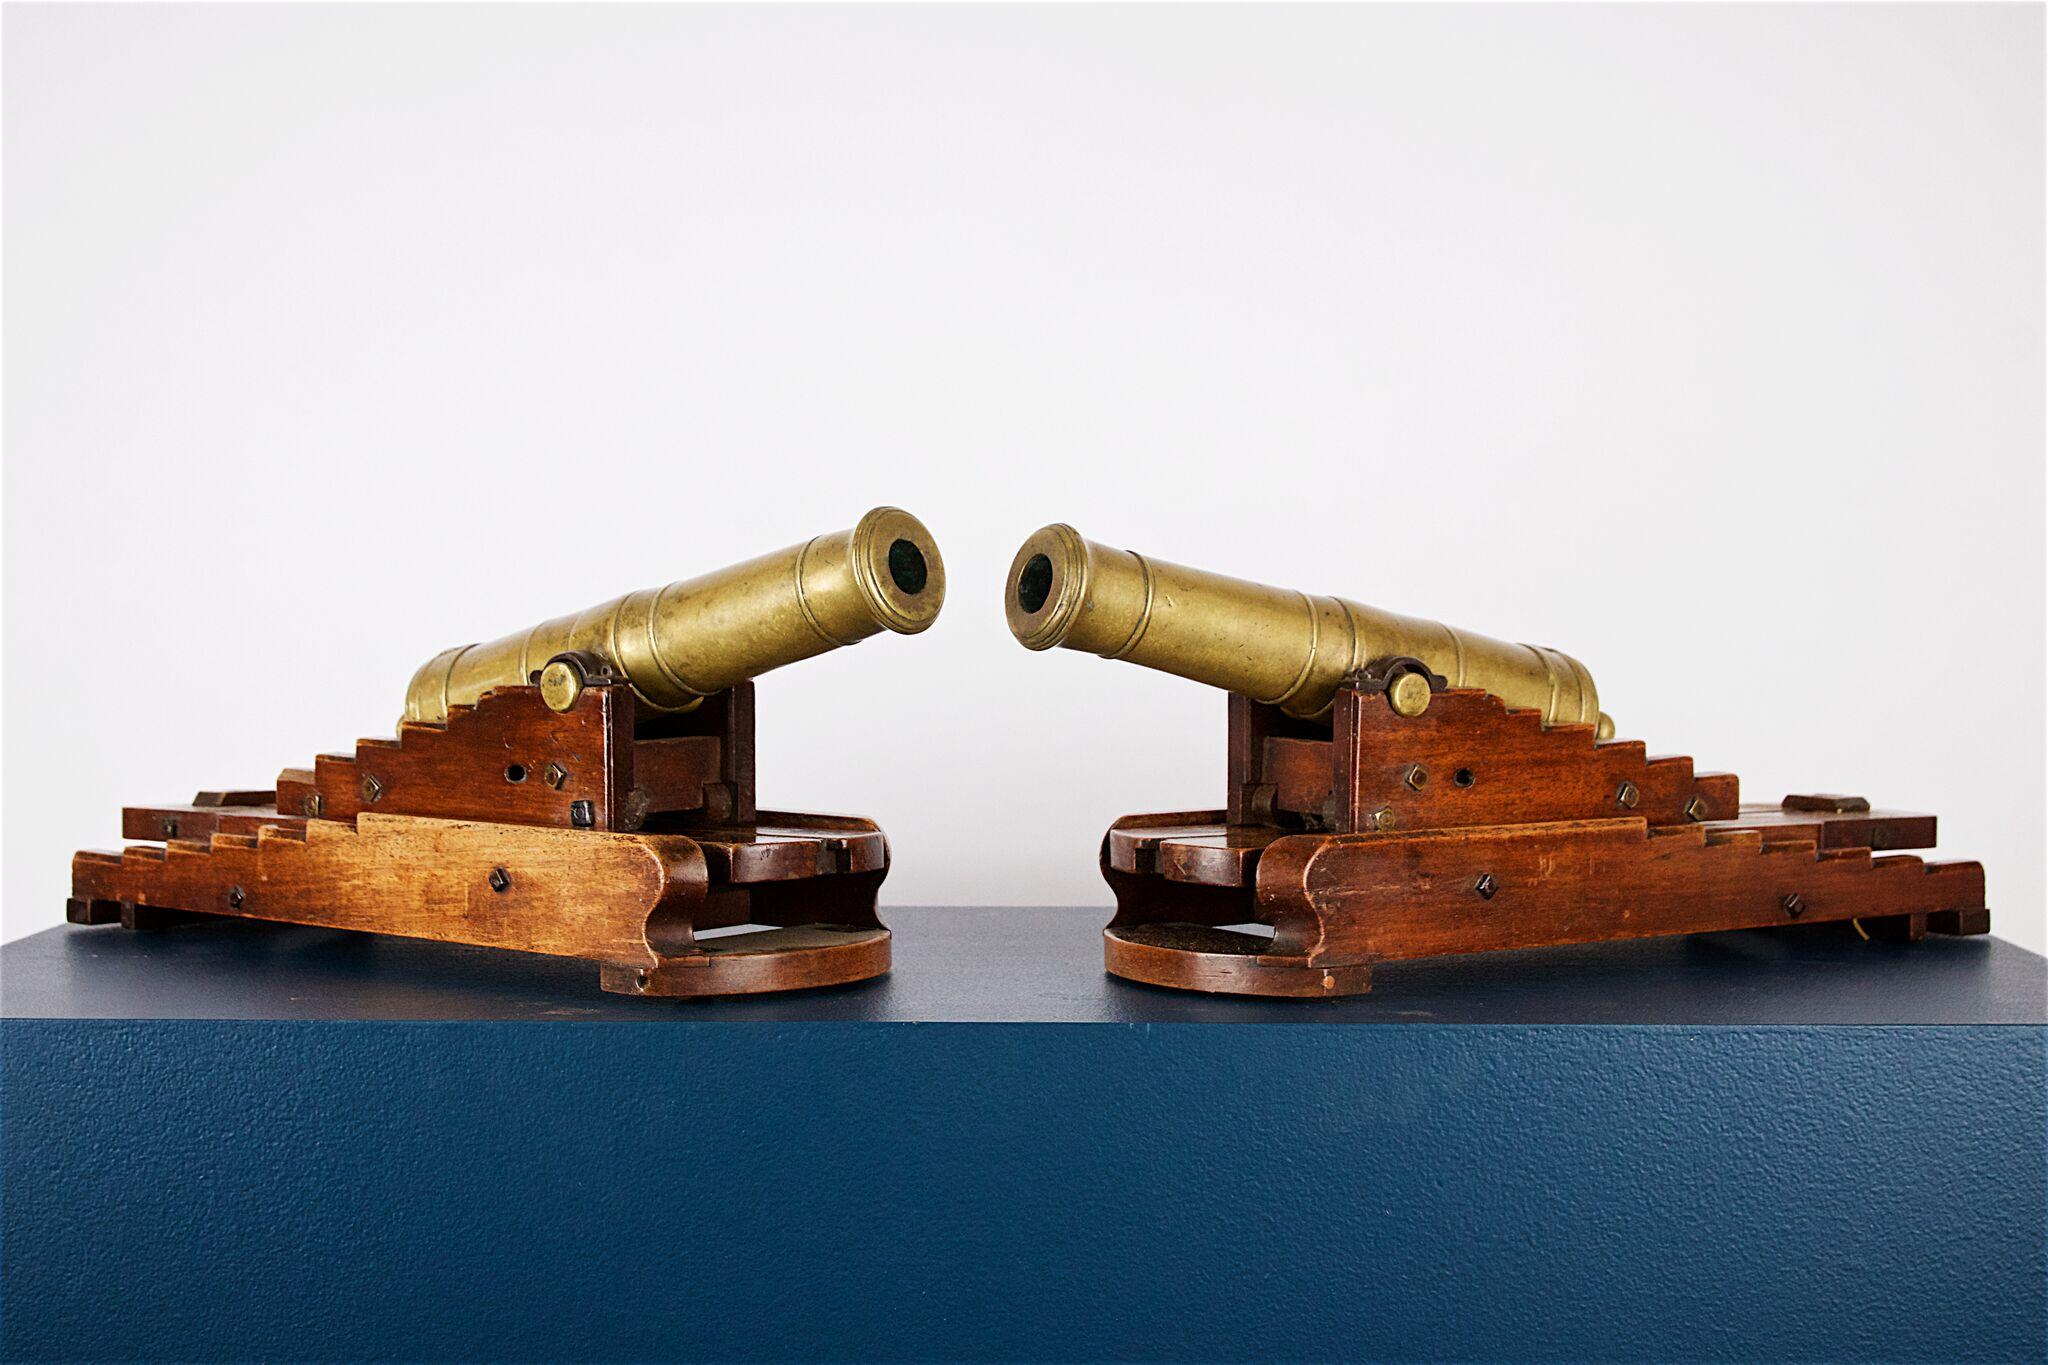 A very good pair of brass 19th century models of 32-pounder canon on mahogany elevating carriages. Circa 1840 English